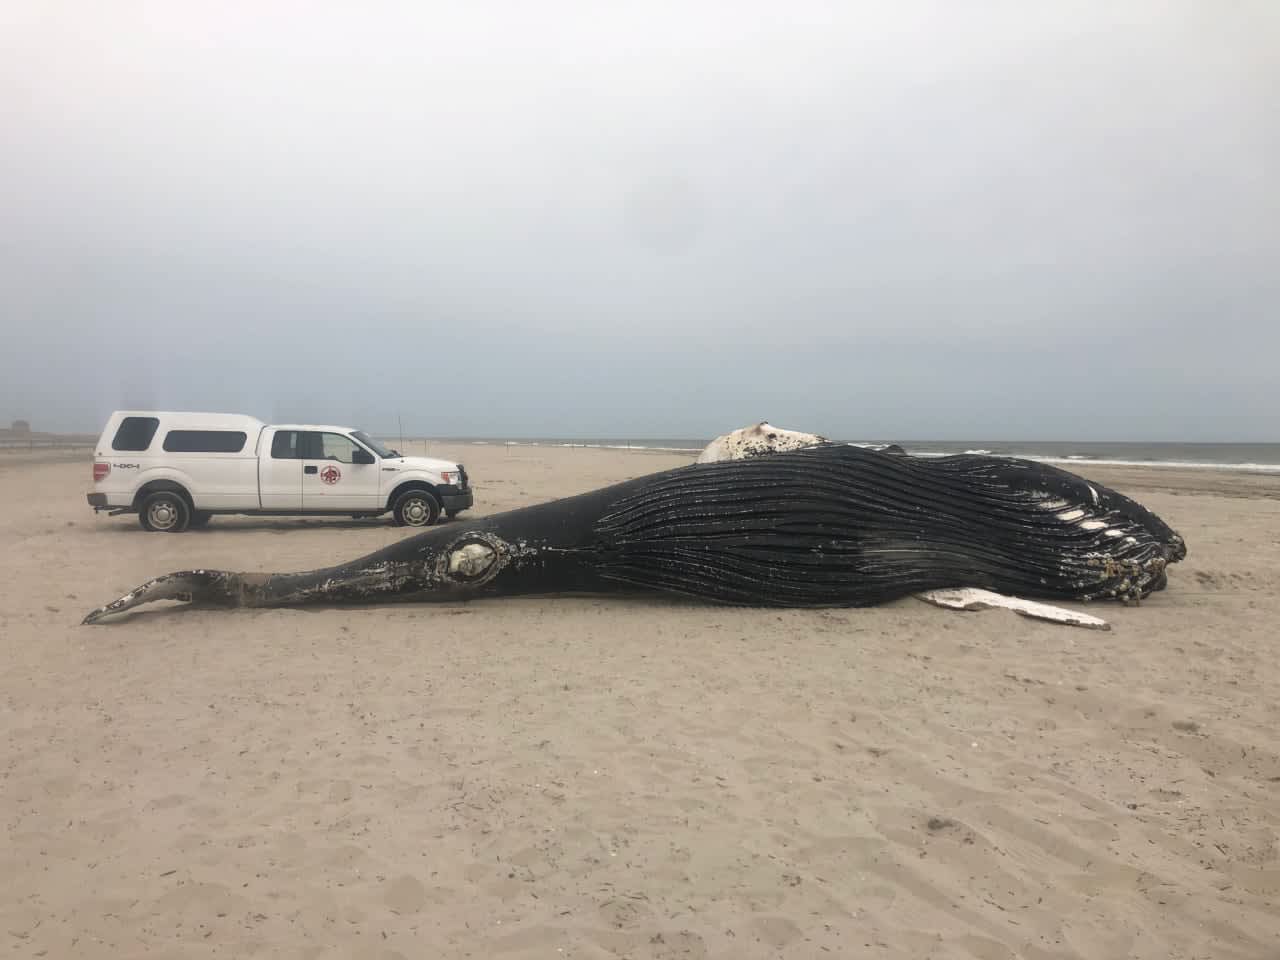 The necropsy of a whale that died at sea is under way Friday on a Brigantine beach.